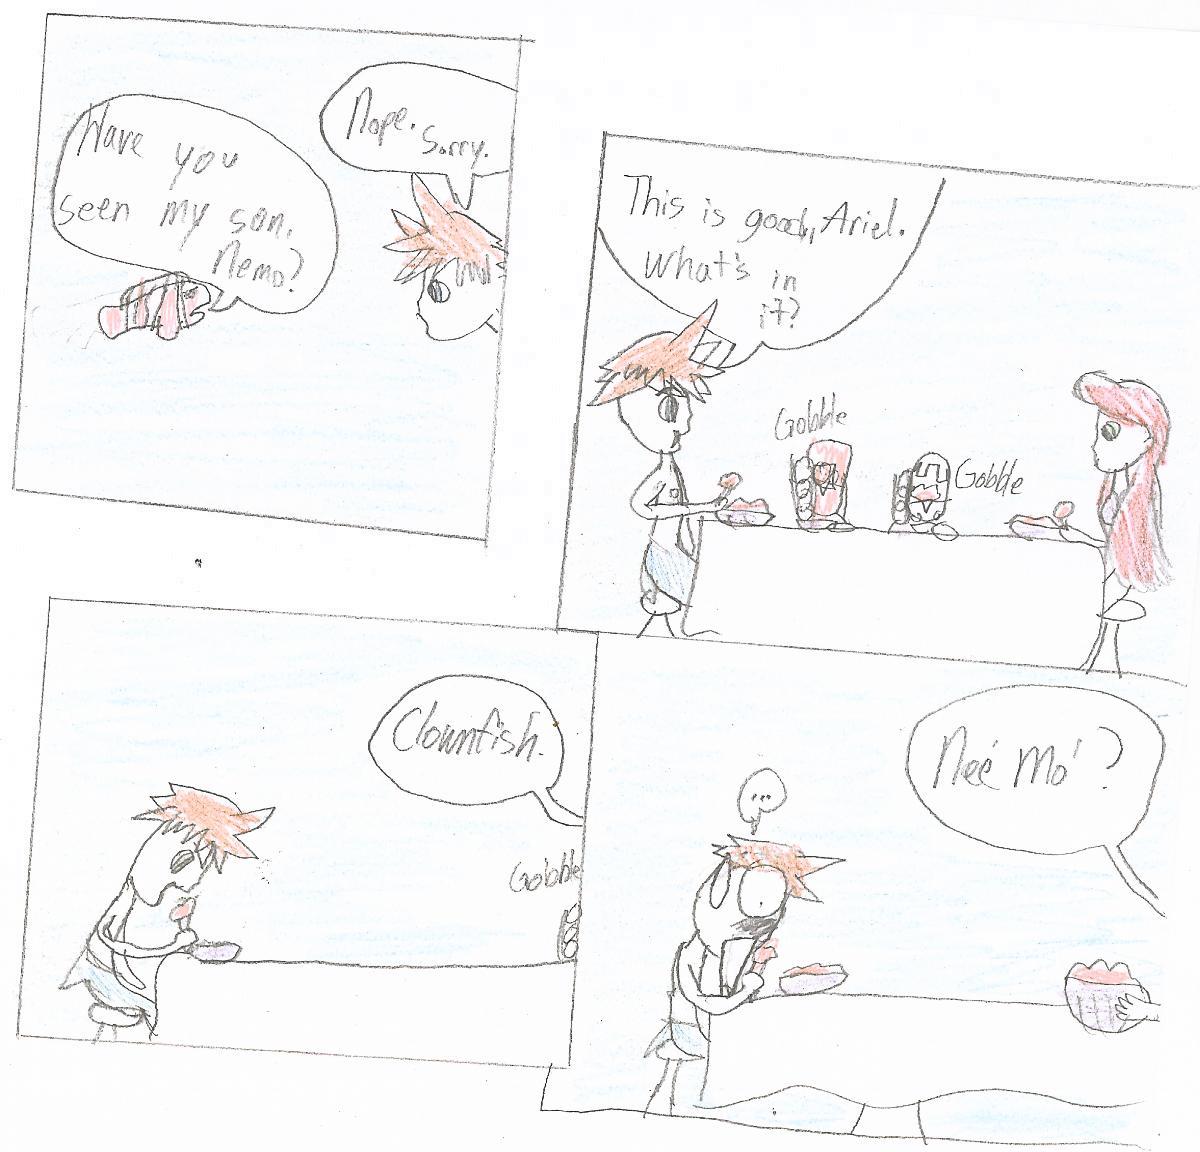 What Really Happened to Nemo by soras_girl_247